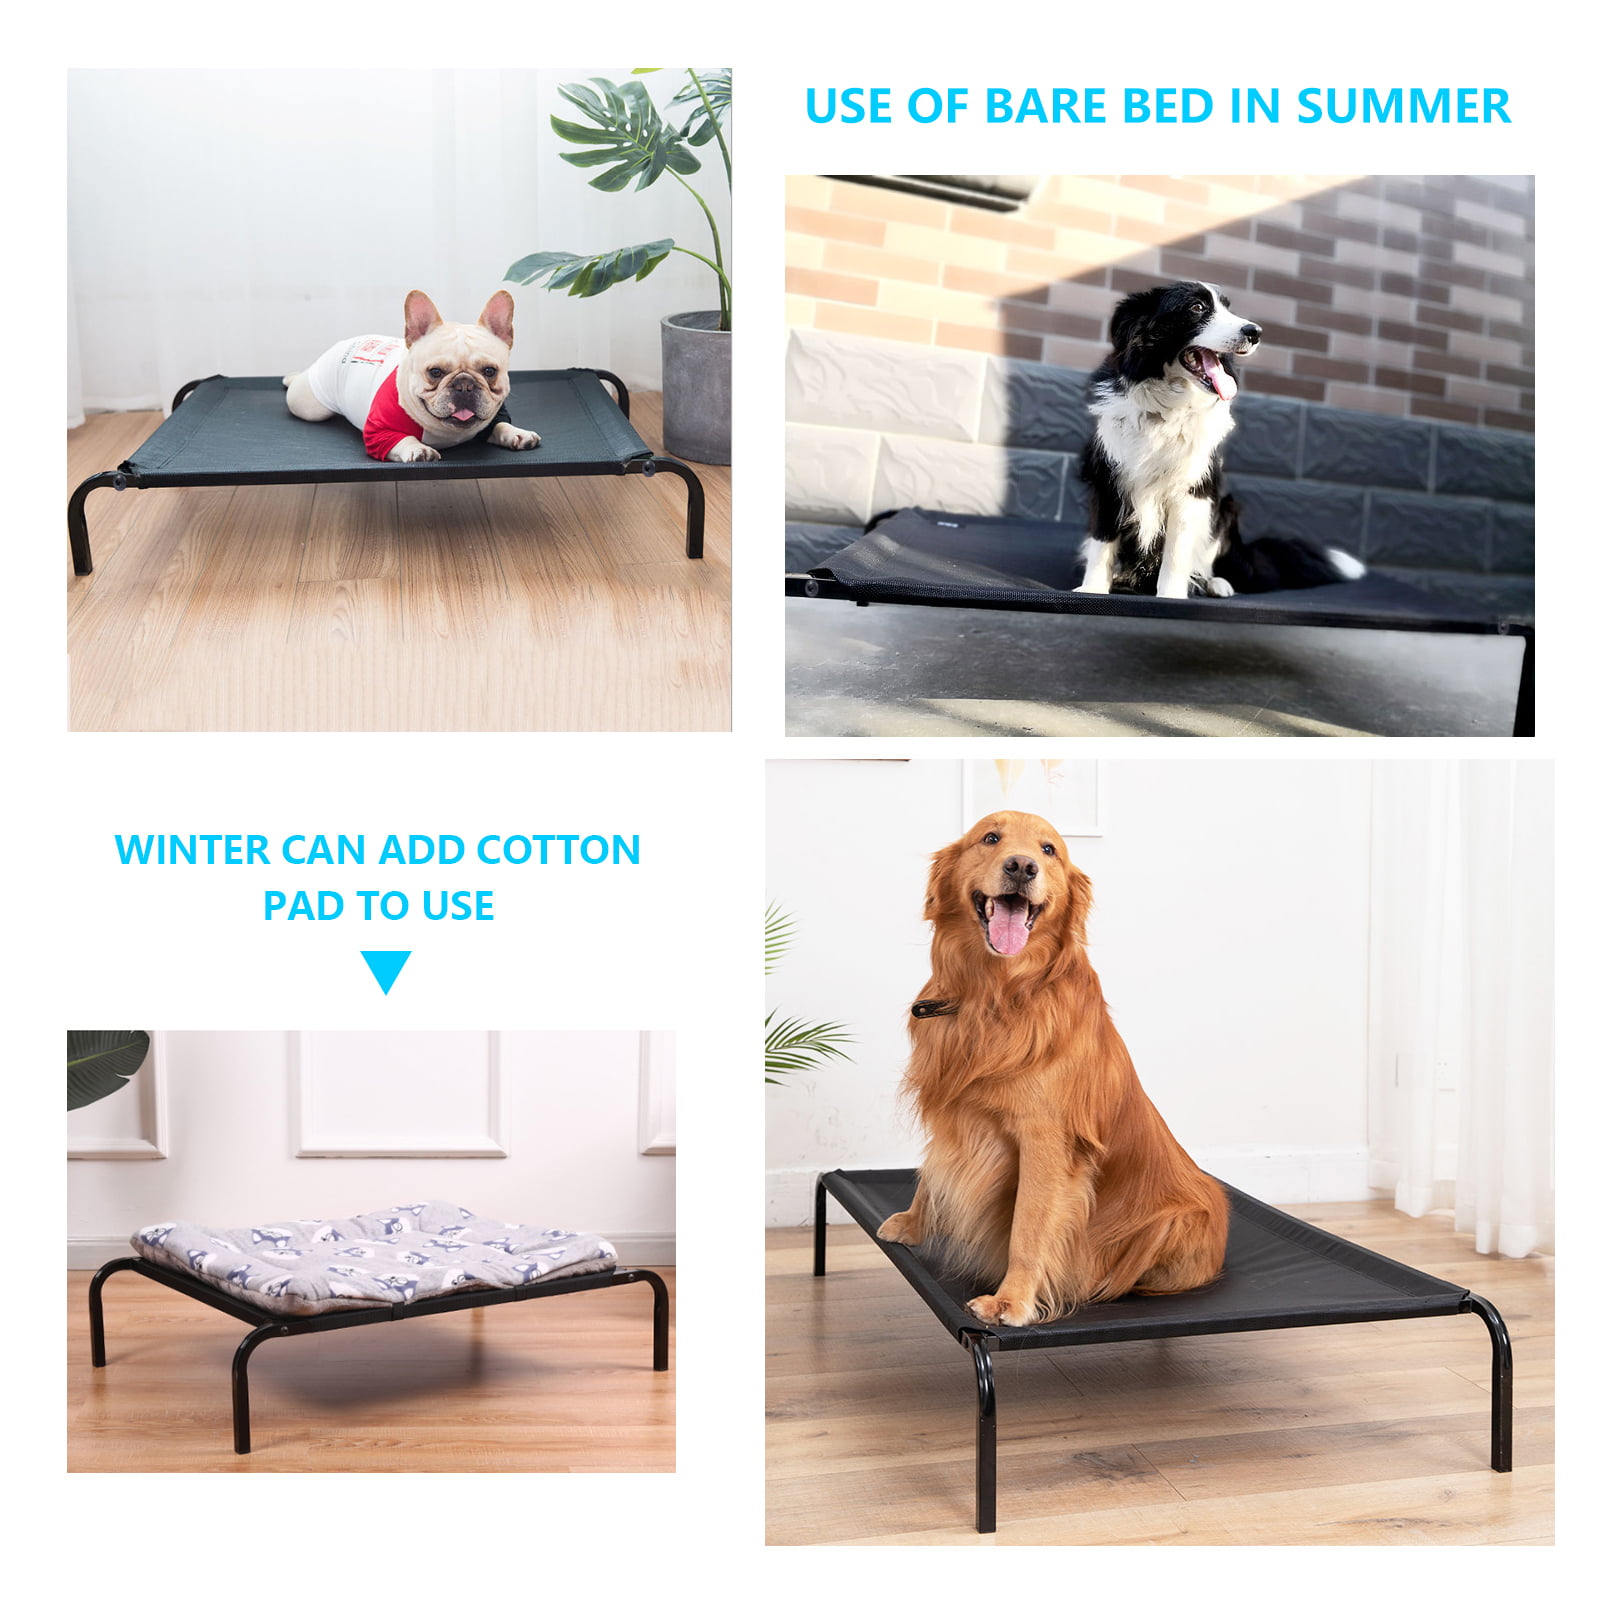 Outdoor Elevated Dog Bed - 49in Cooling Pet Dog Beds for Extra Large Medium Small Dogs - Portable Dog Cot for Camping or Beach, Durable Summer Frame W